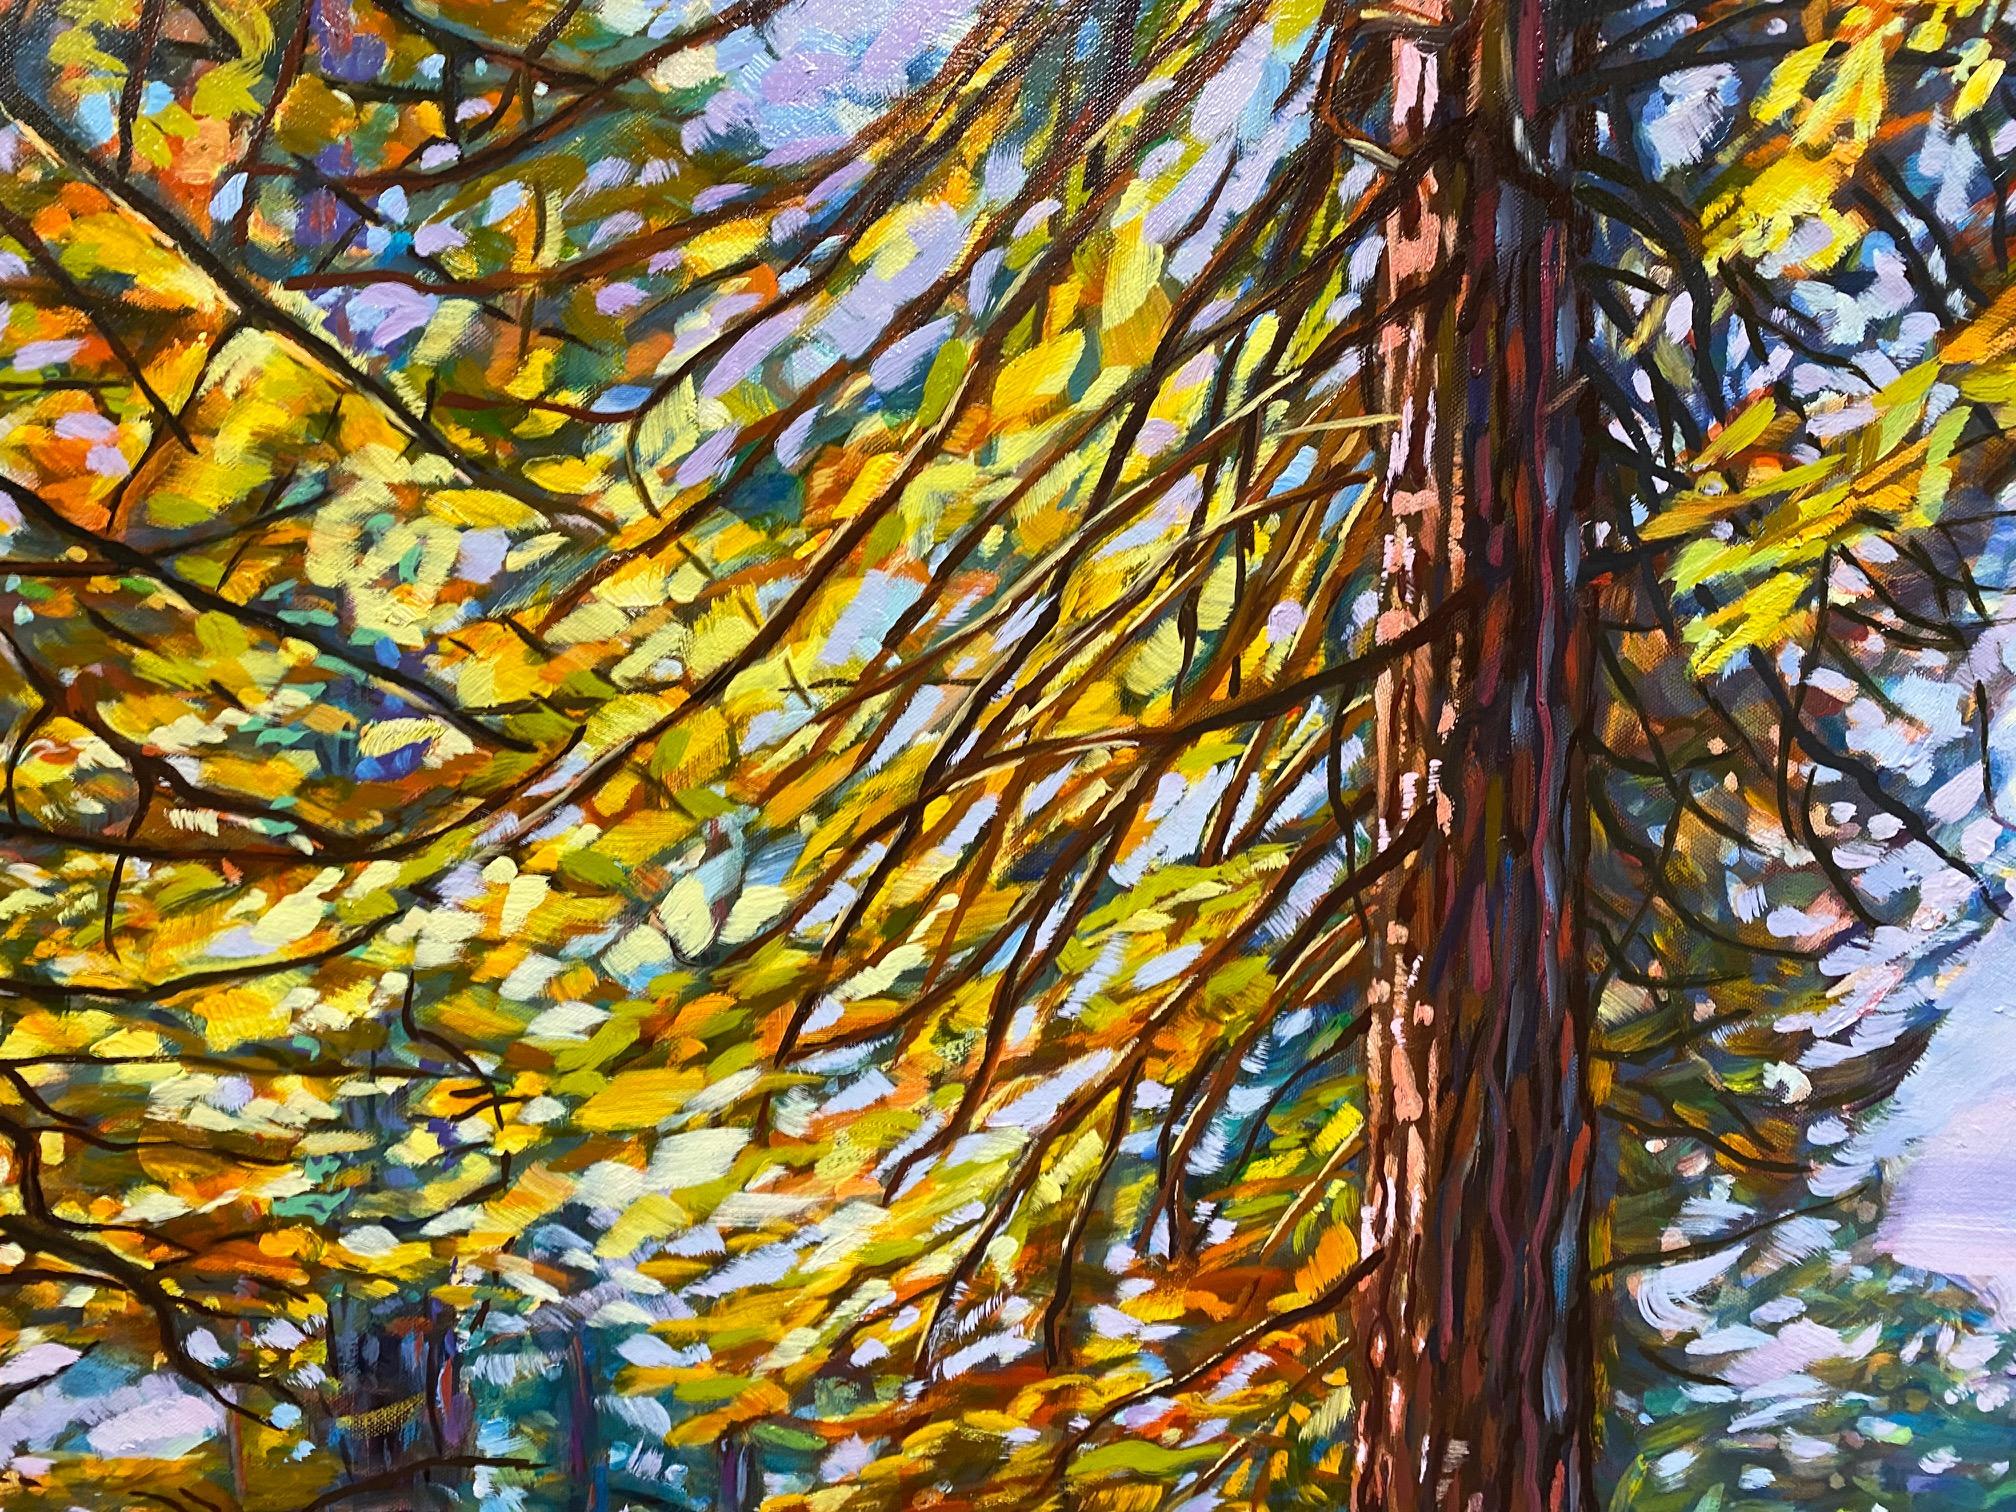 Muir Woods, California original 24x48 expressionist landscape - Expressionist Painting by Charles Tersolo